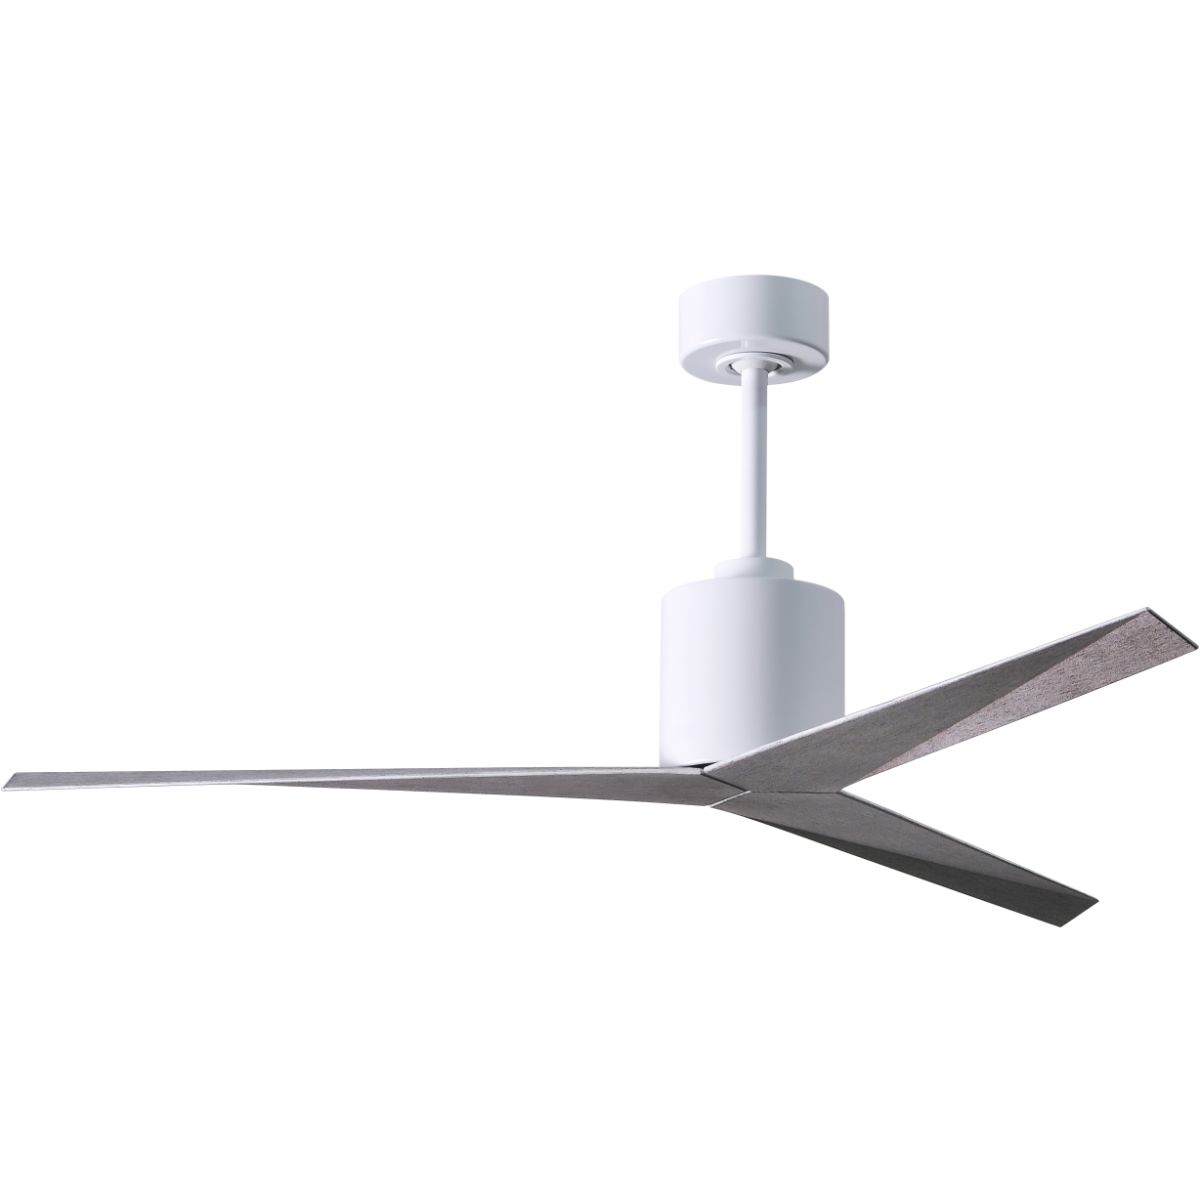 Eliza 56 Inch Propeller Outdoor Ceiling Fan, Wall/Remote Control Included